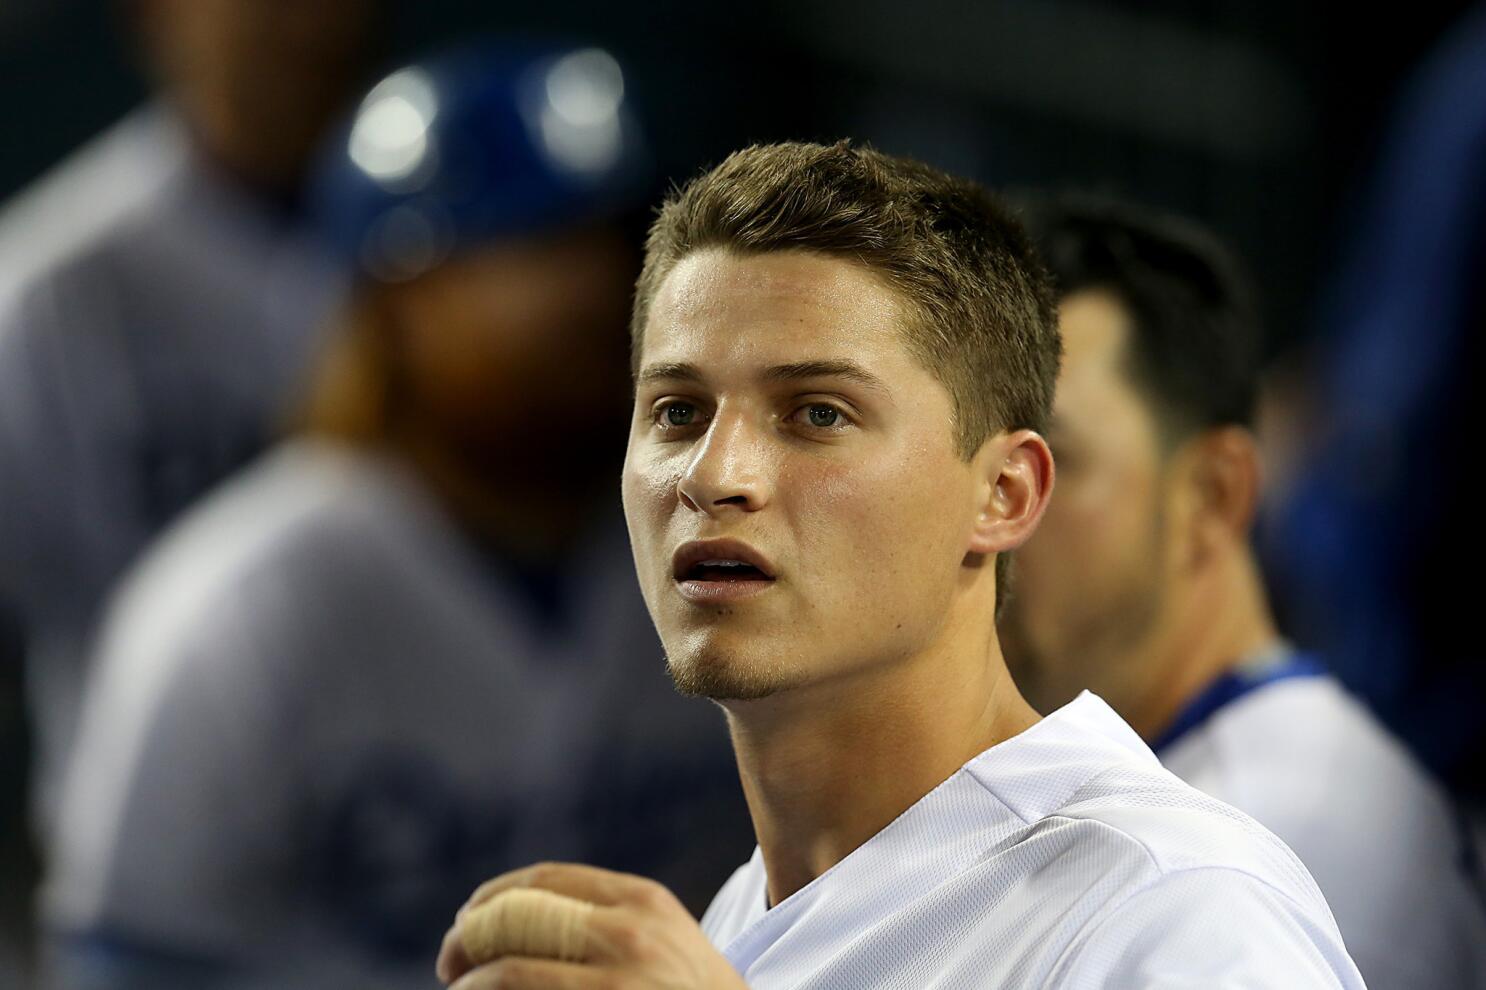 Dodgers Corey Seager keeps hold on shortstop as Jimmy Rollins